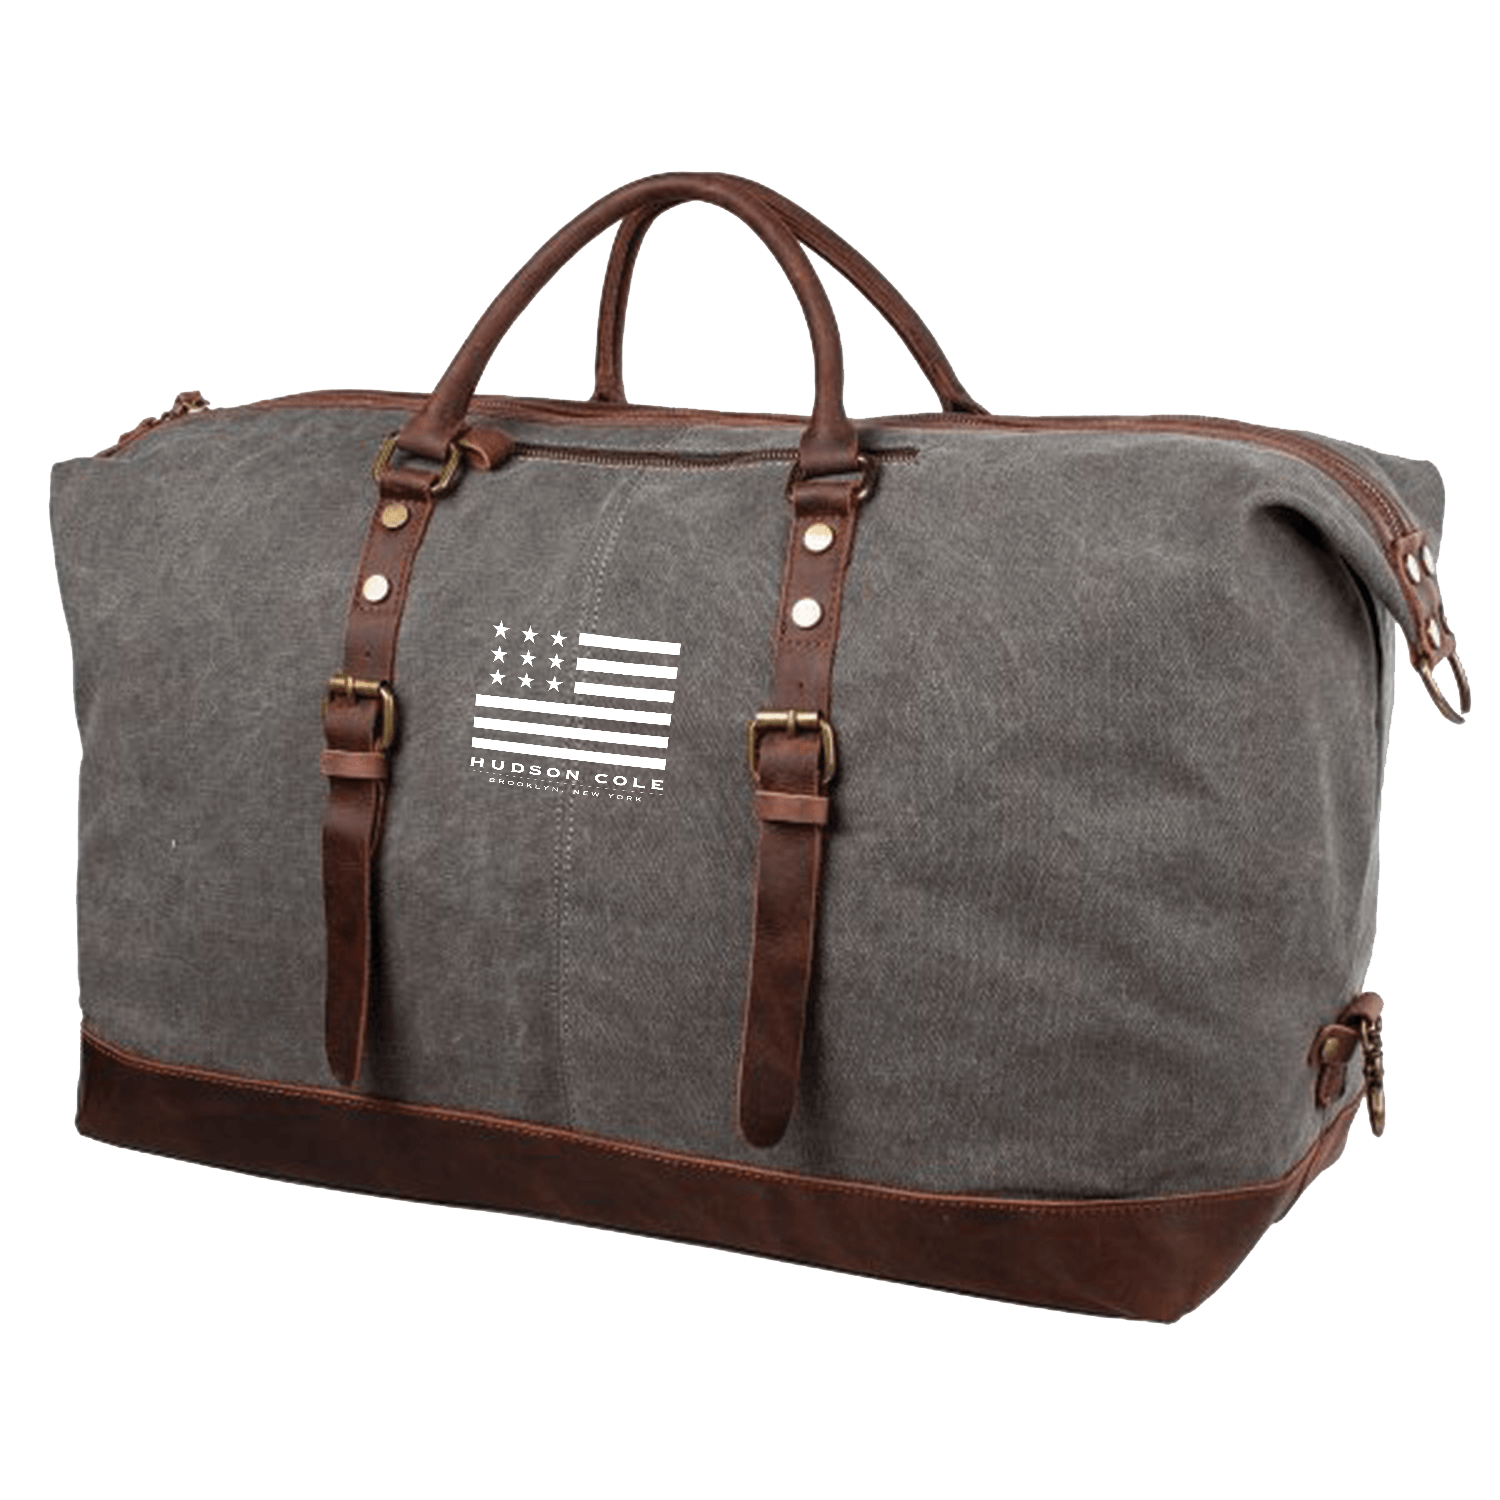 OVERSIZED CANVAS DUFFLE WITH LEATHER TRIM - Hudson Cole BKNY - Luggage